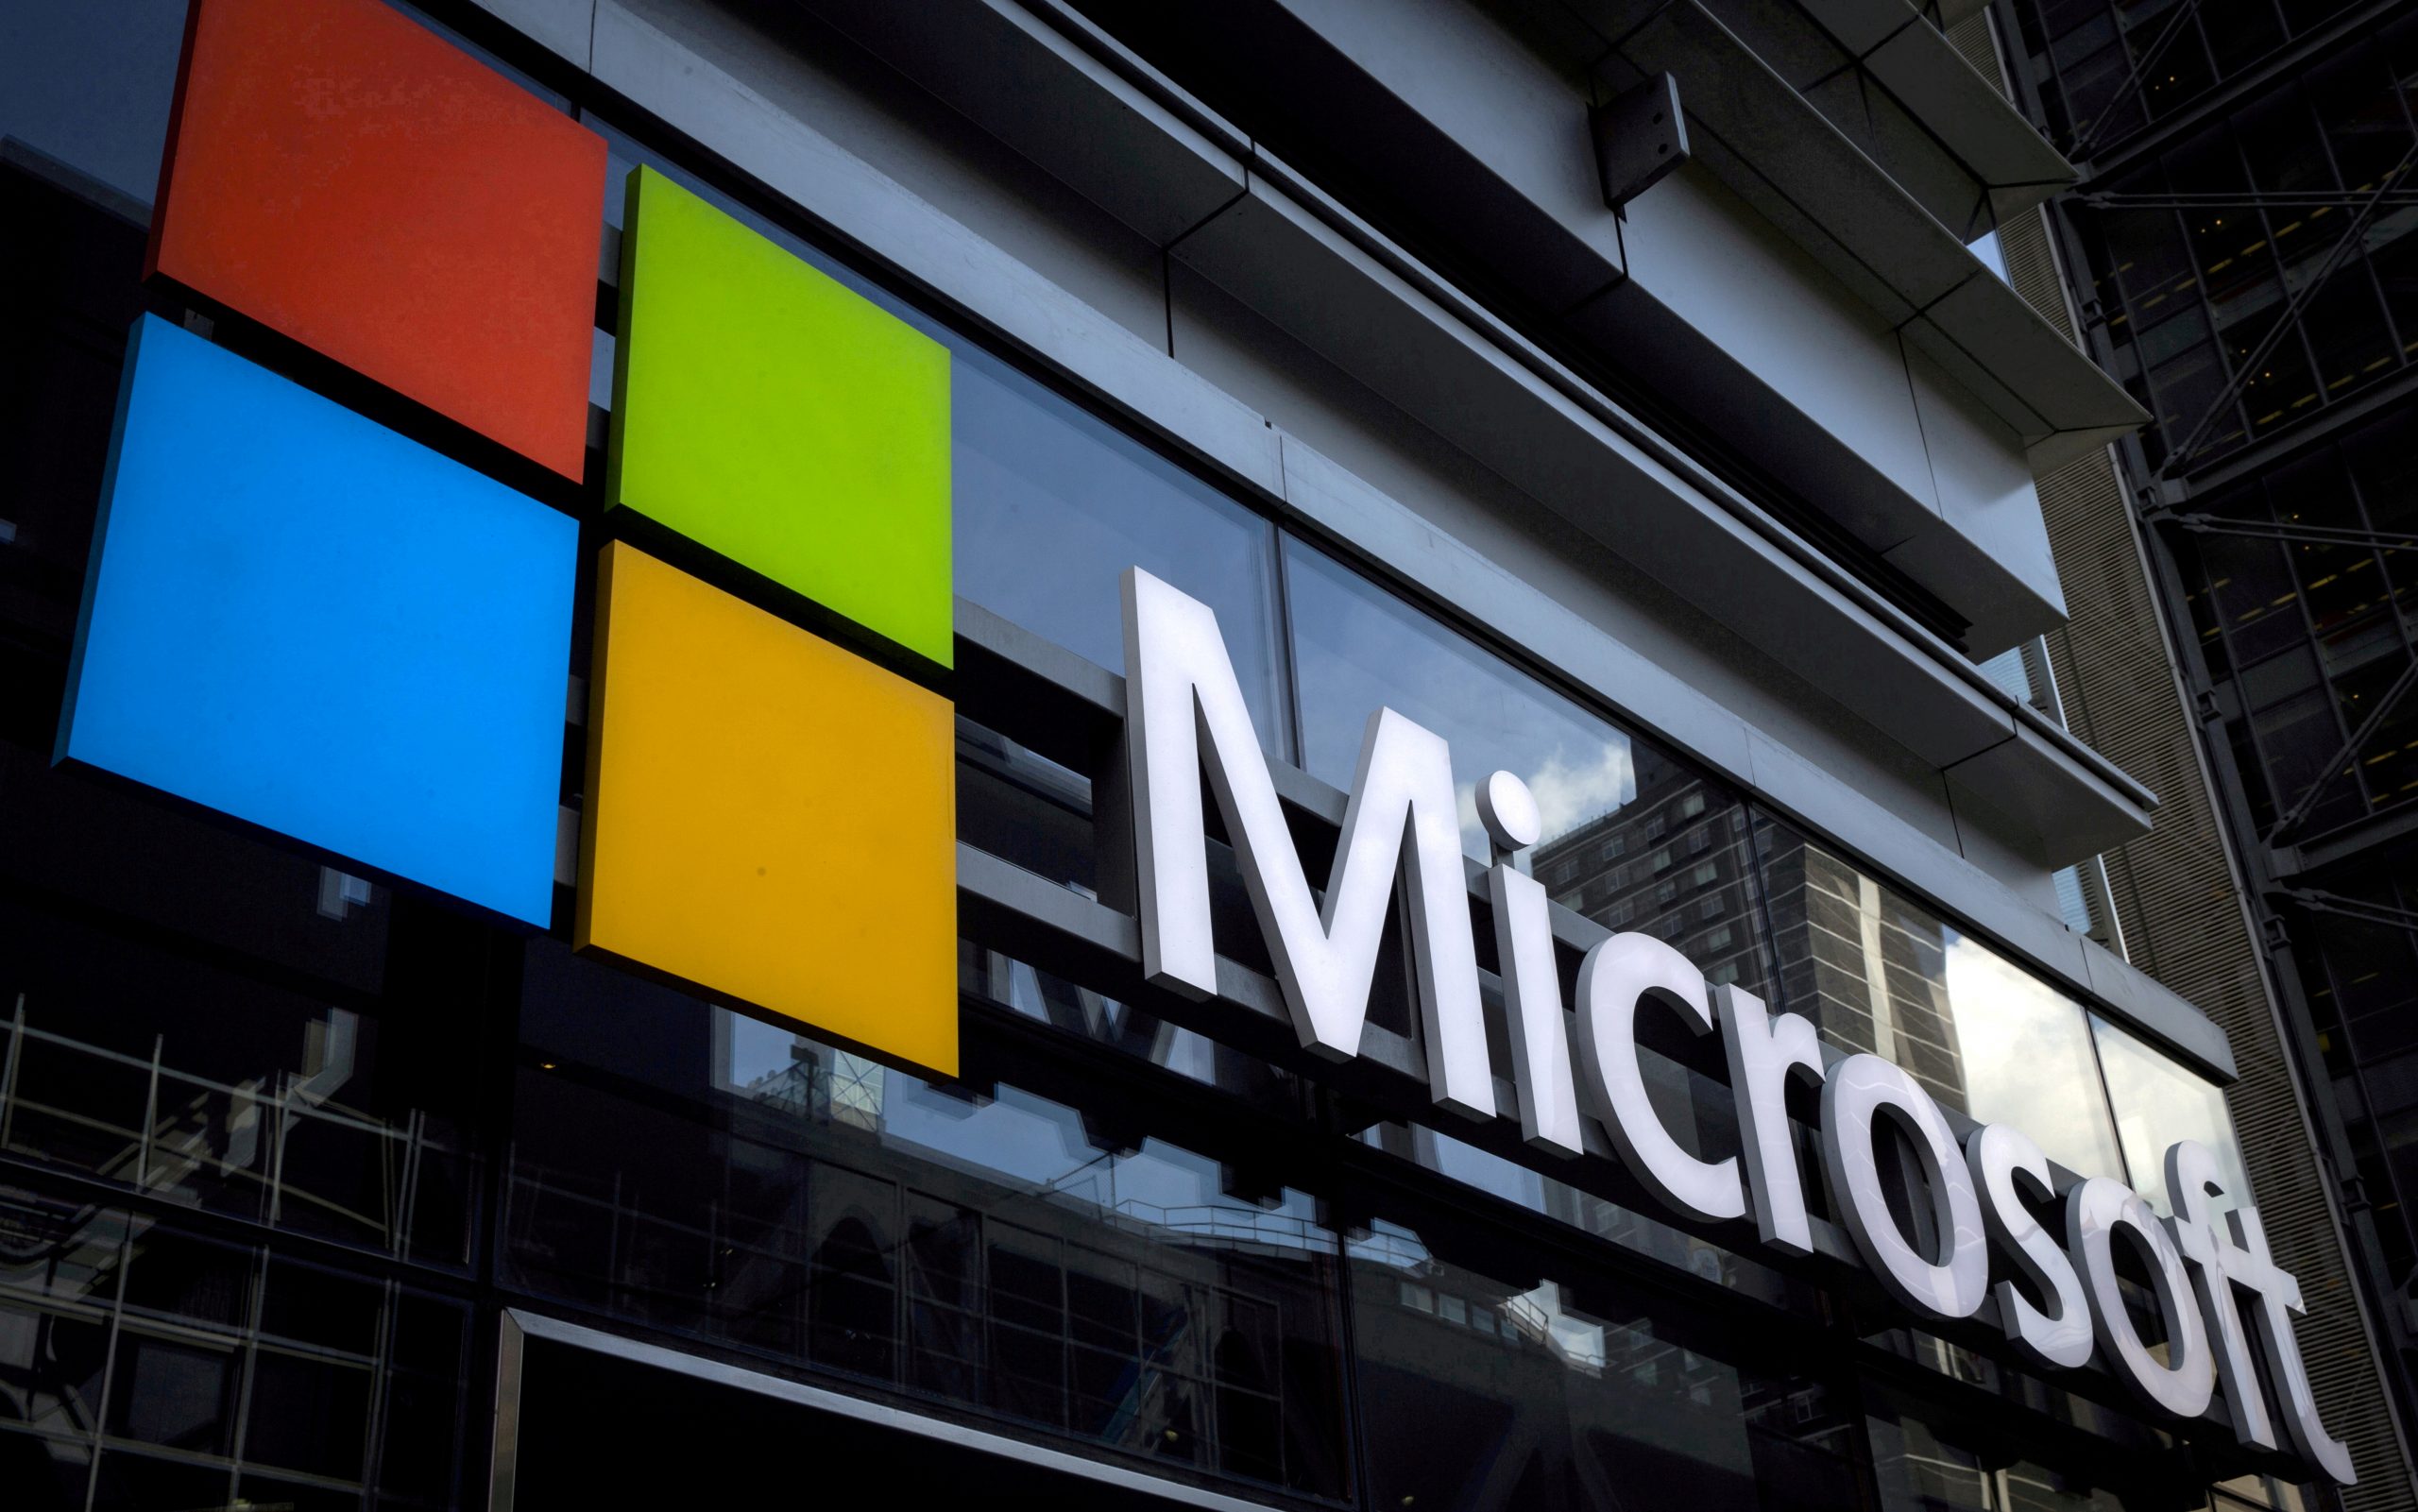  Microsoft says group behind SolarWinds hack now targeting government agencies, NGOs